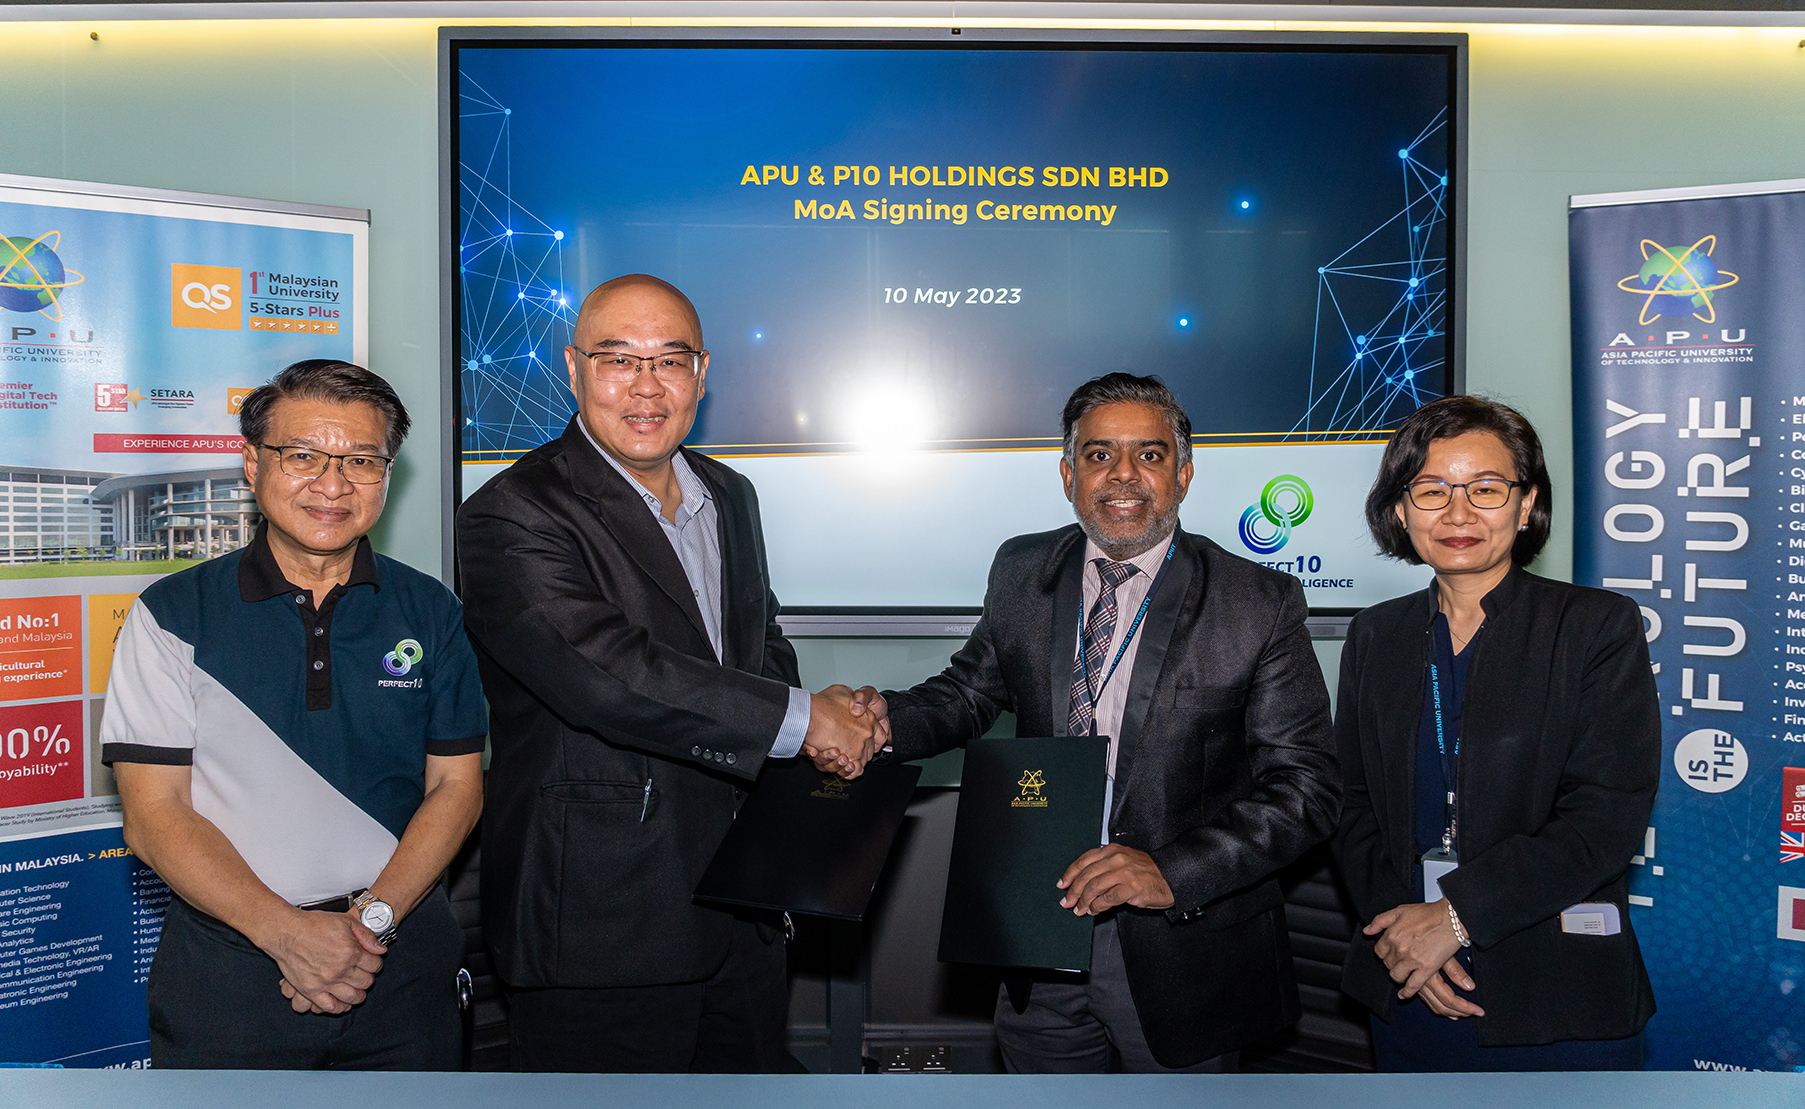 Prof. Dr. Vinesh Thiruchelvam (2nd from right), Chief Innovation and Enterprise Officer of APU, and Mr. Alan Lim Wai Loong (2nd from left), Chief Executive Officer of P10 Holdings Sdn. Bhd., formalized a strategic working partnership, witnessed by Associate Professor Dr. Chong Lee Lee (1st from right), Head of APU’s School of Accounting and Finance, and Mr. Chan Chee Kong (1st from left), Finance Manager of P10 Holdings Sdn. Bhd.